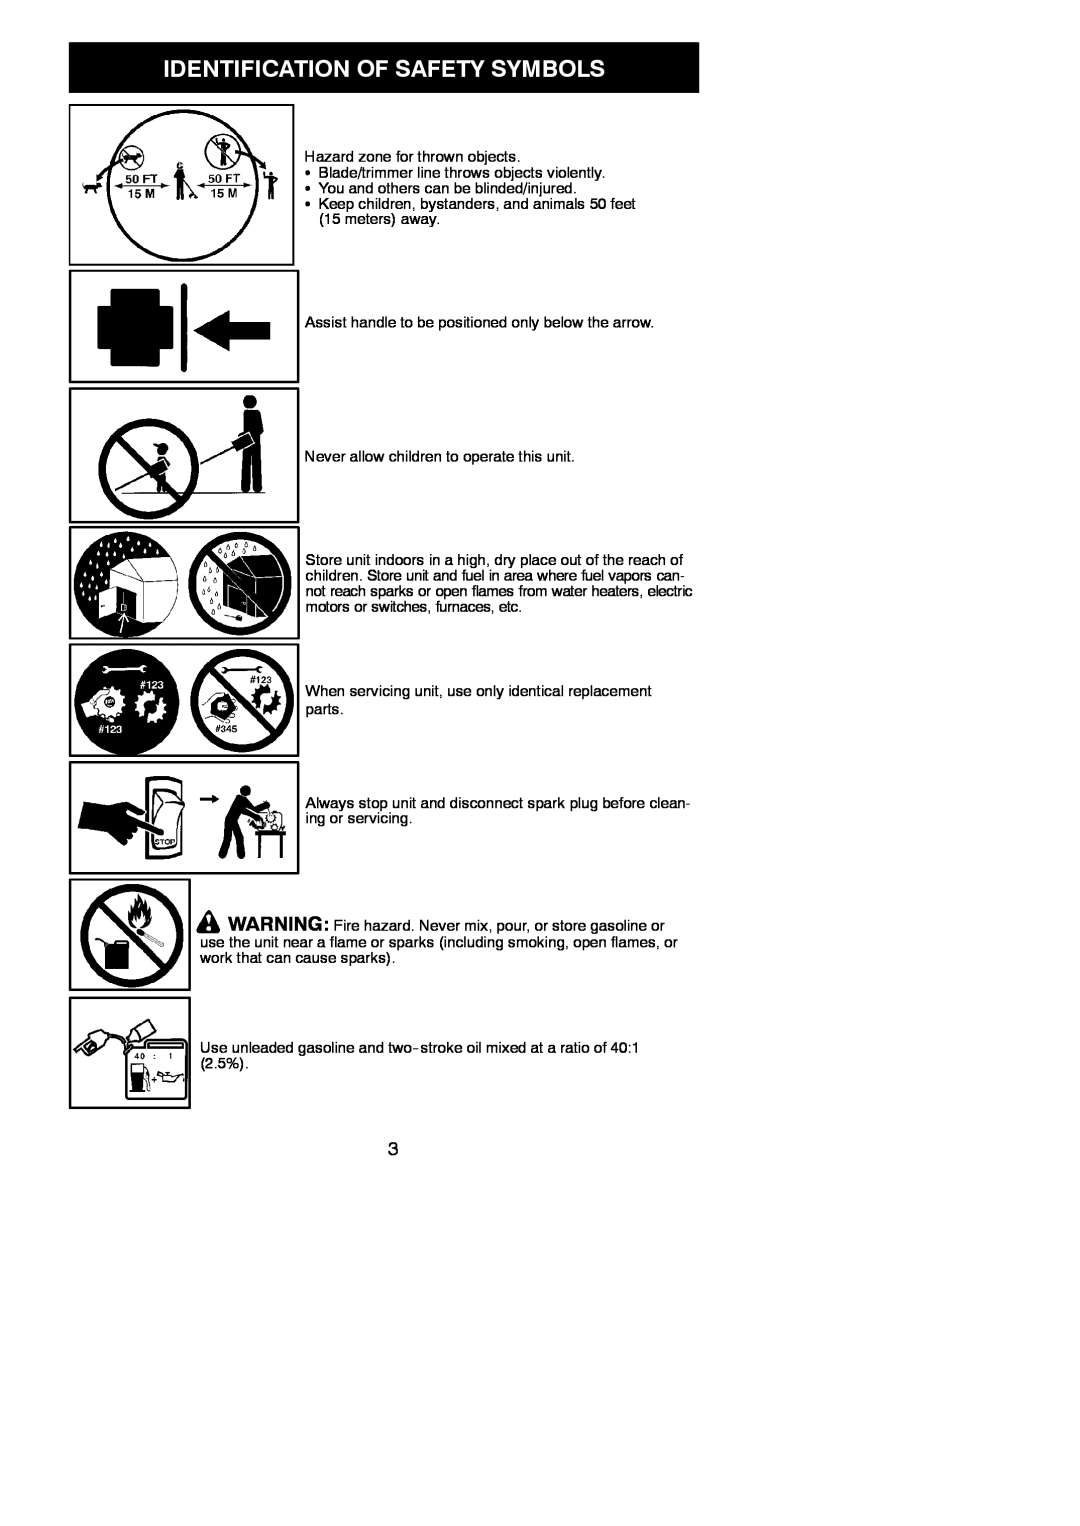 Poulan 545186843 instruction manual Identification Of Safety Symbols, Hazard zone for thrown objects 